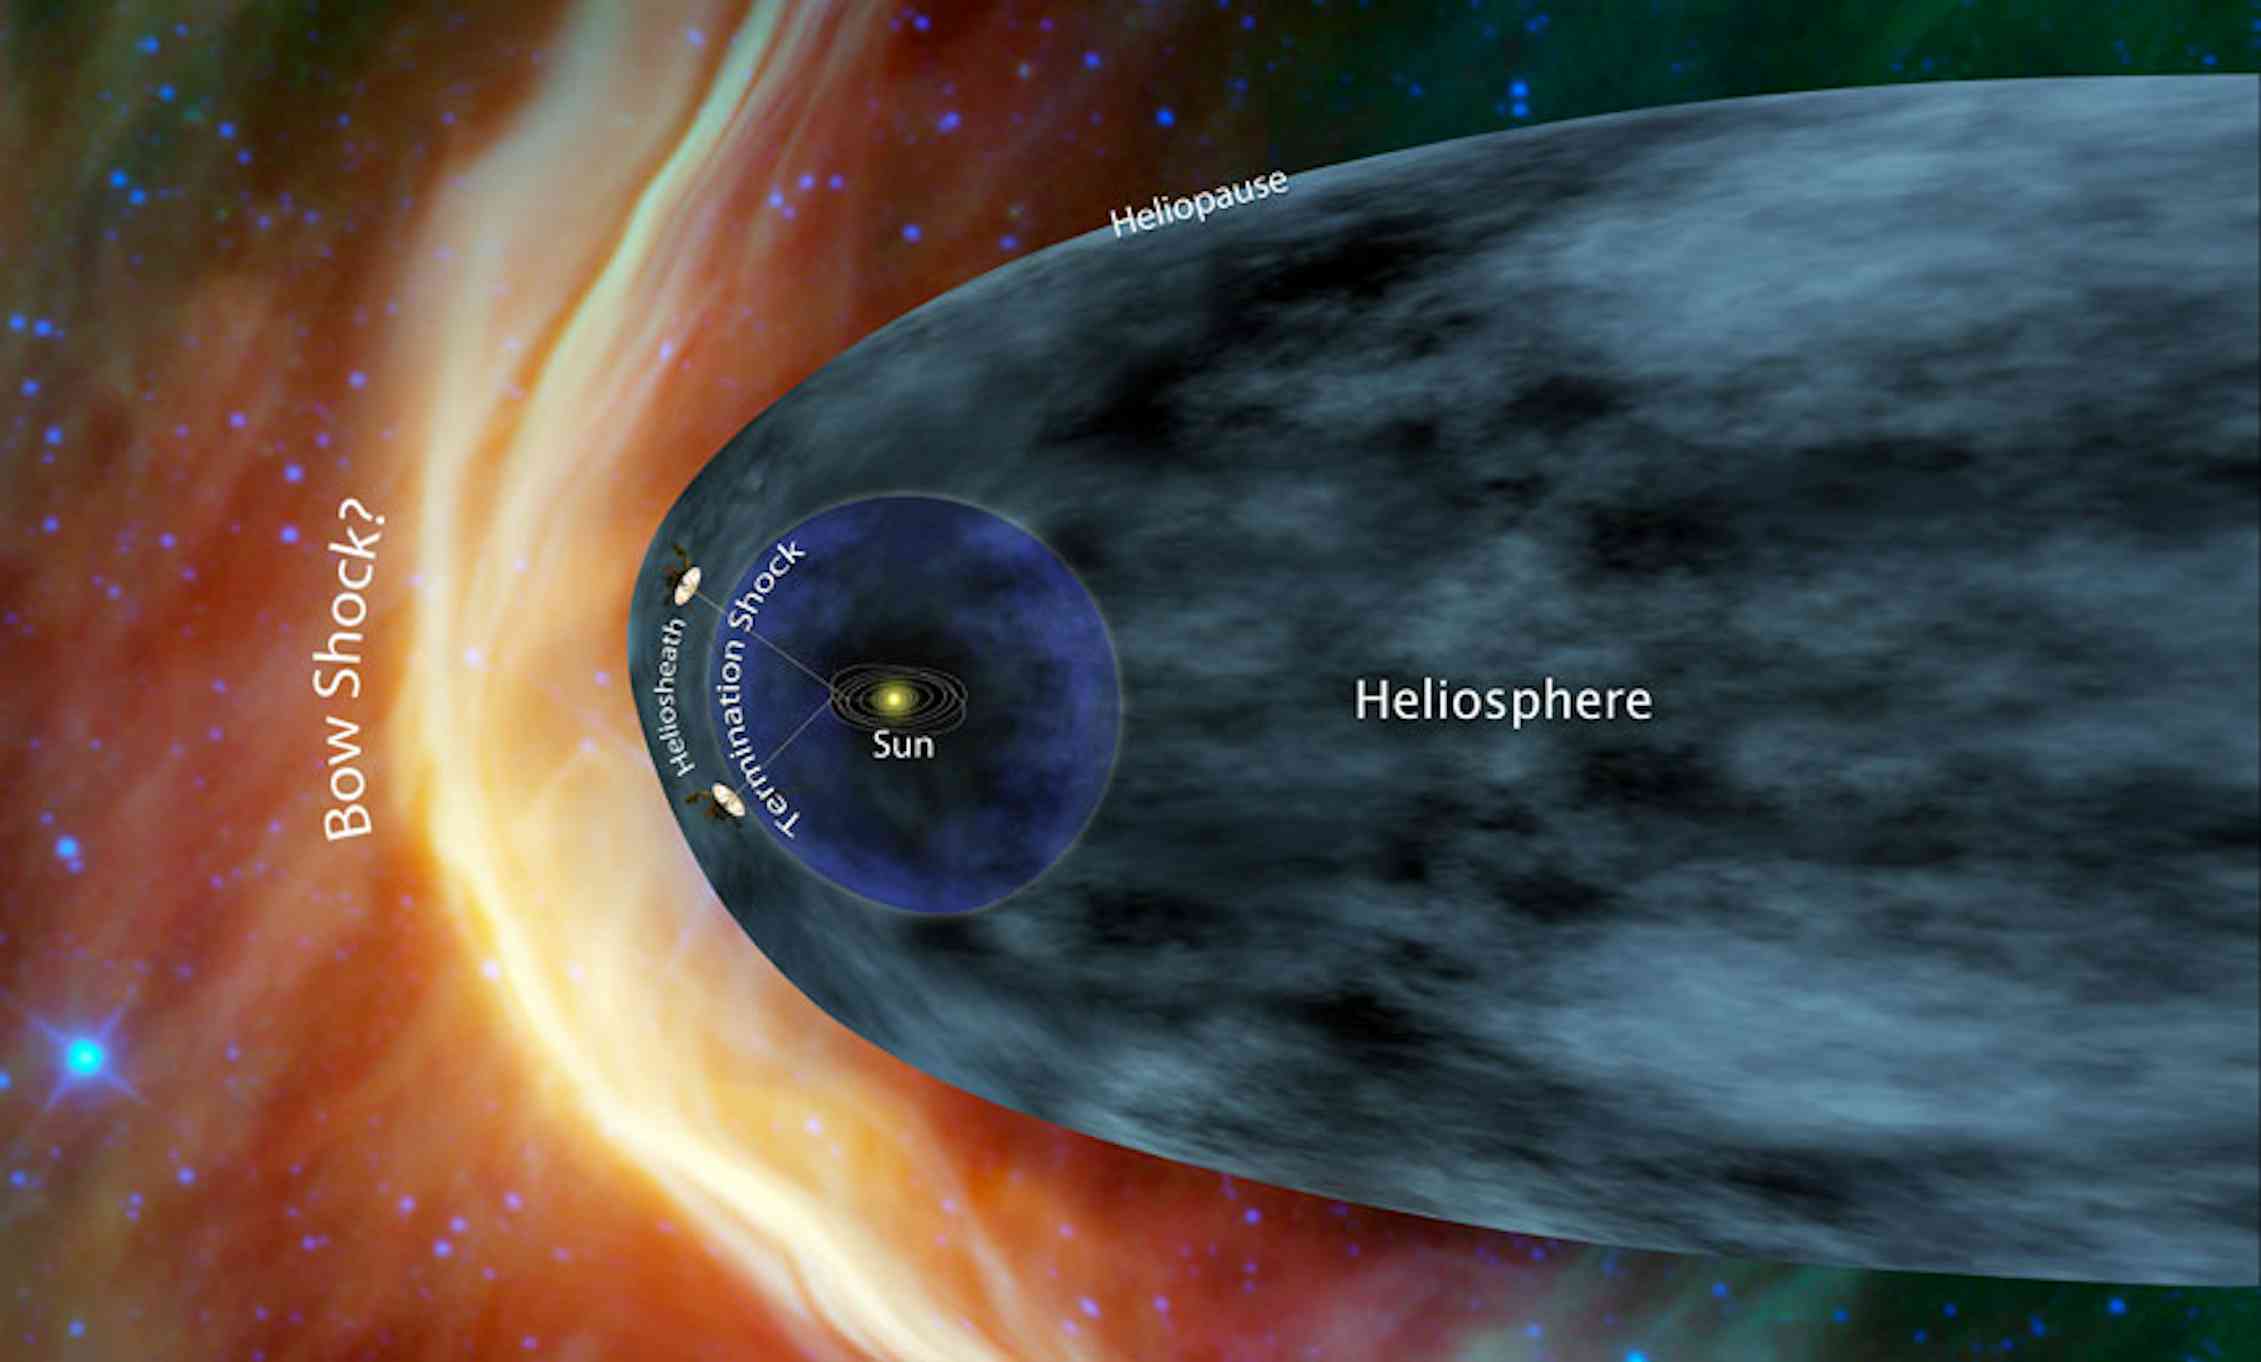 news on voyager 1